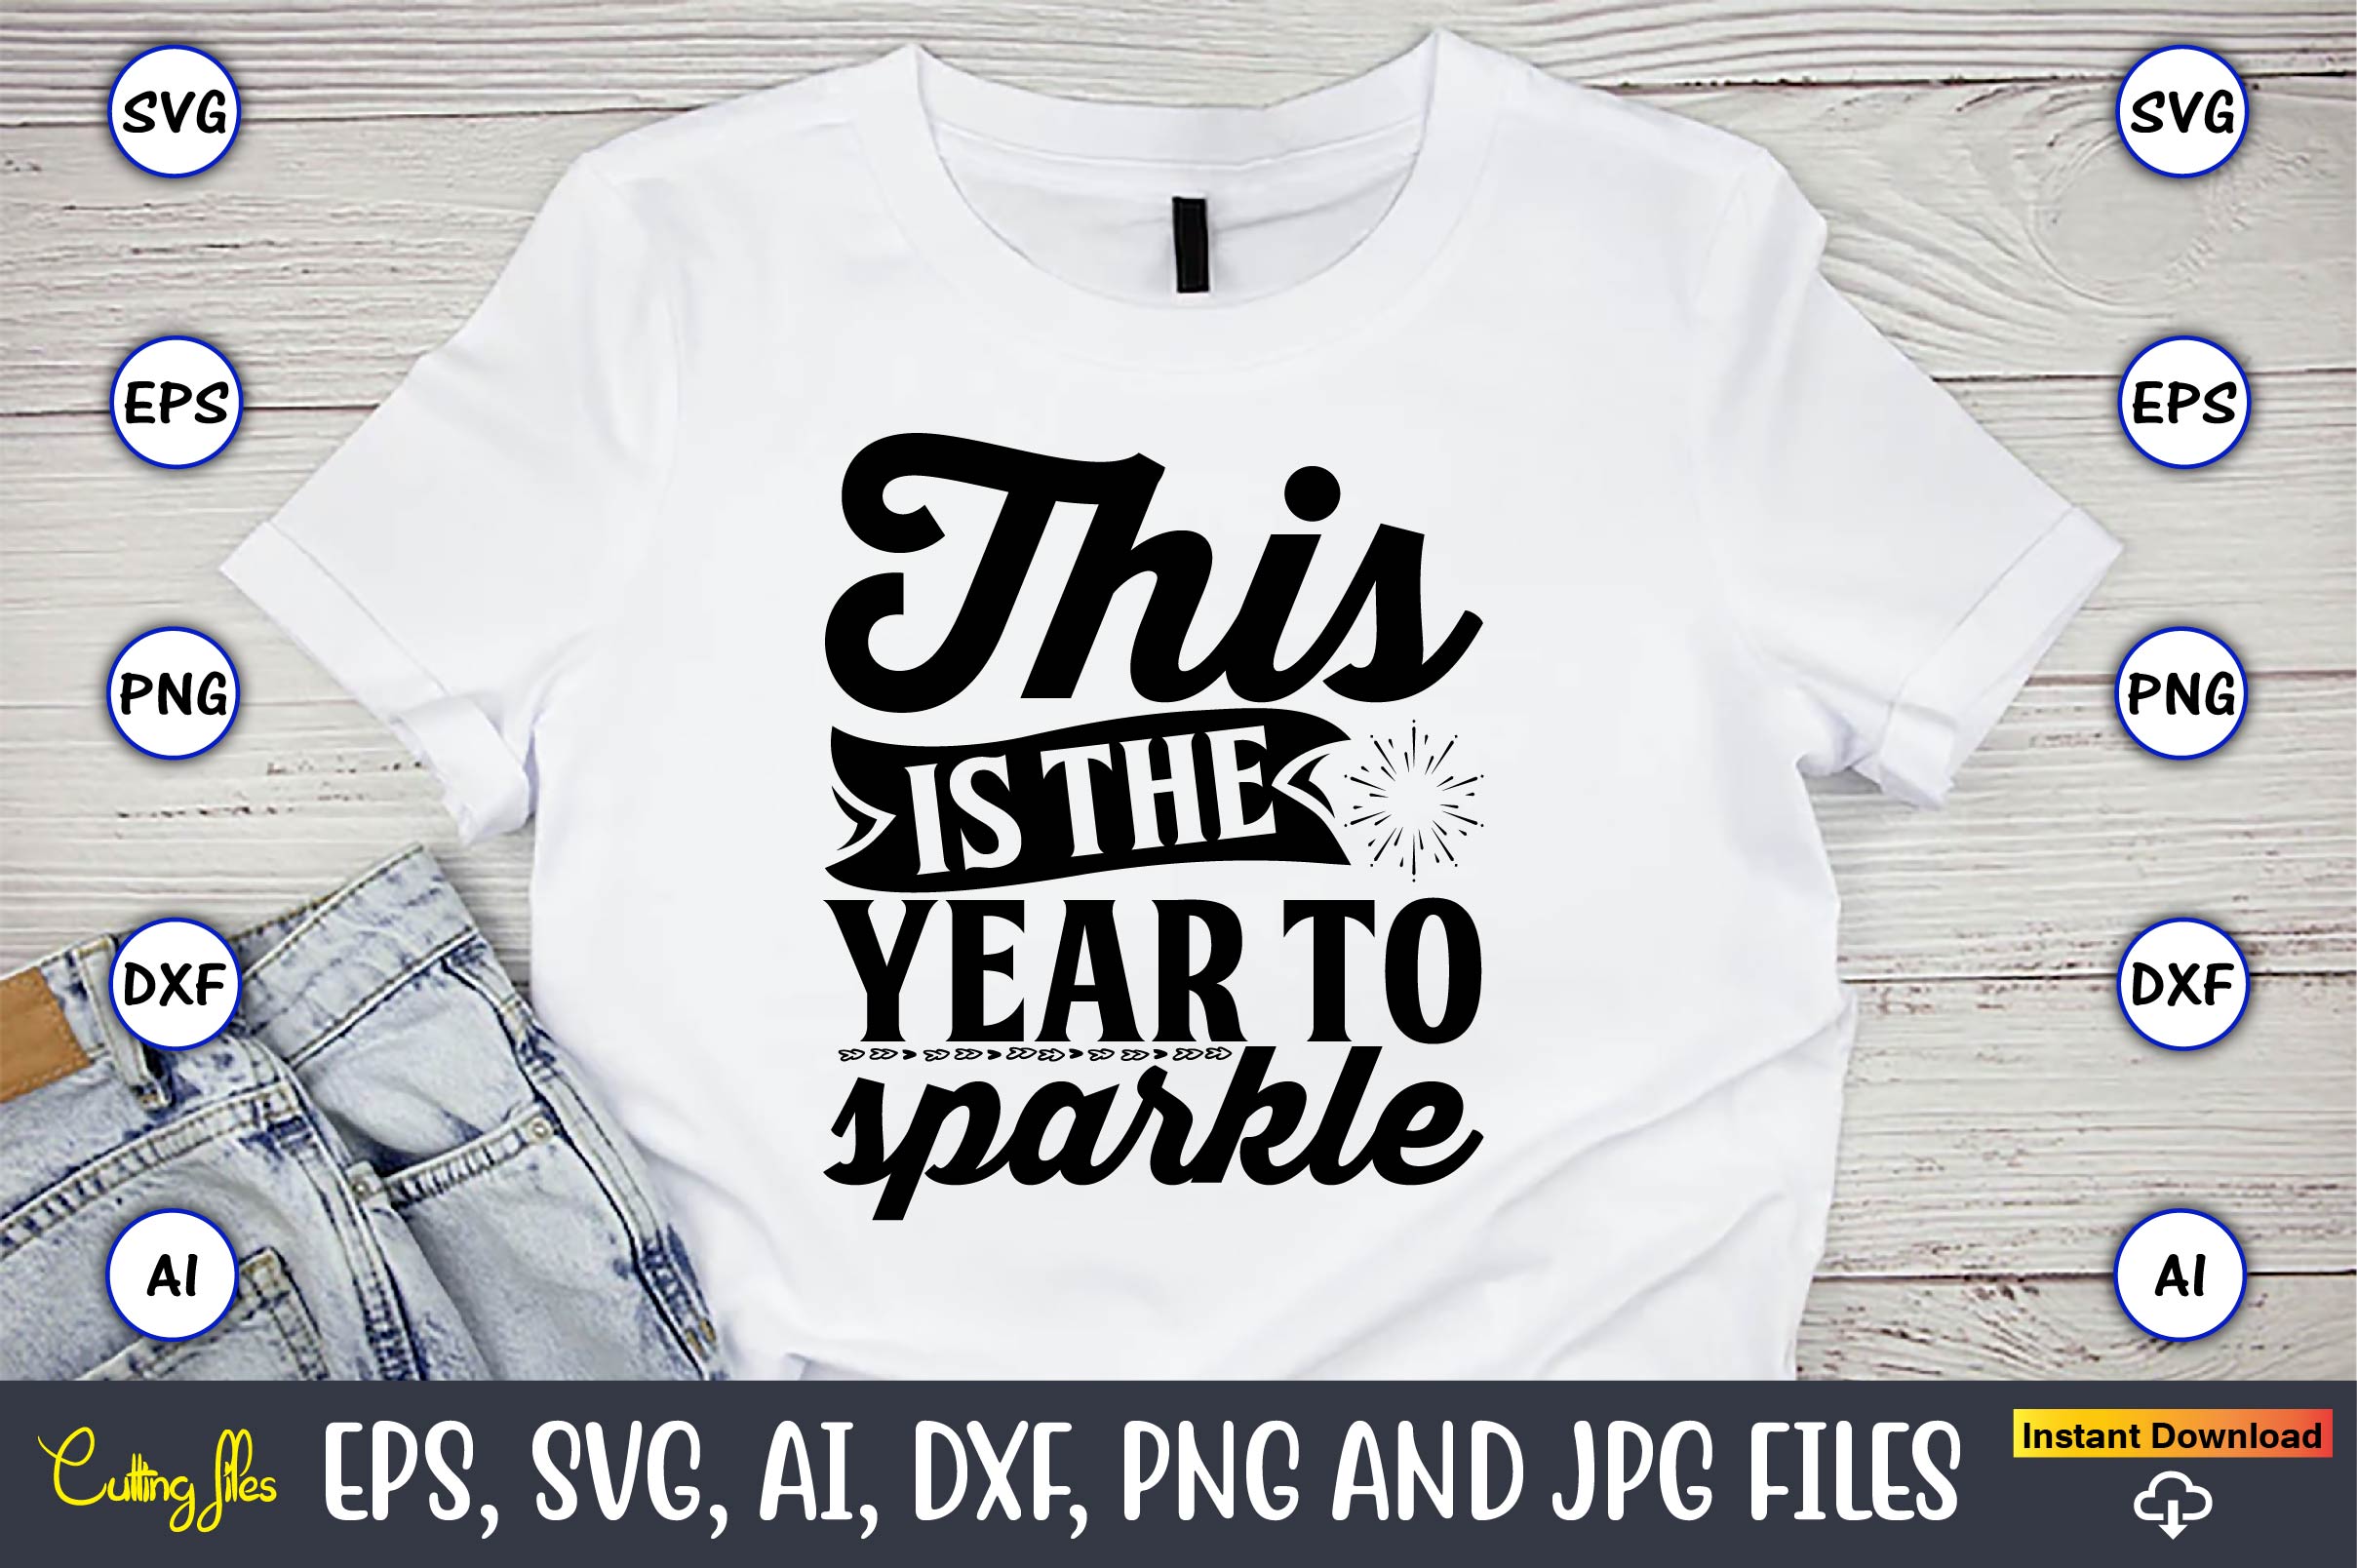 Image of a white t-shirt with a wonderful inscription This is the year to sparkle.